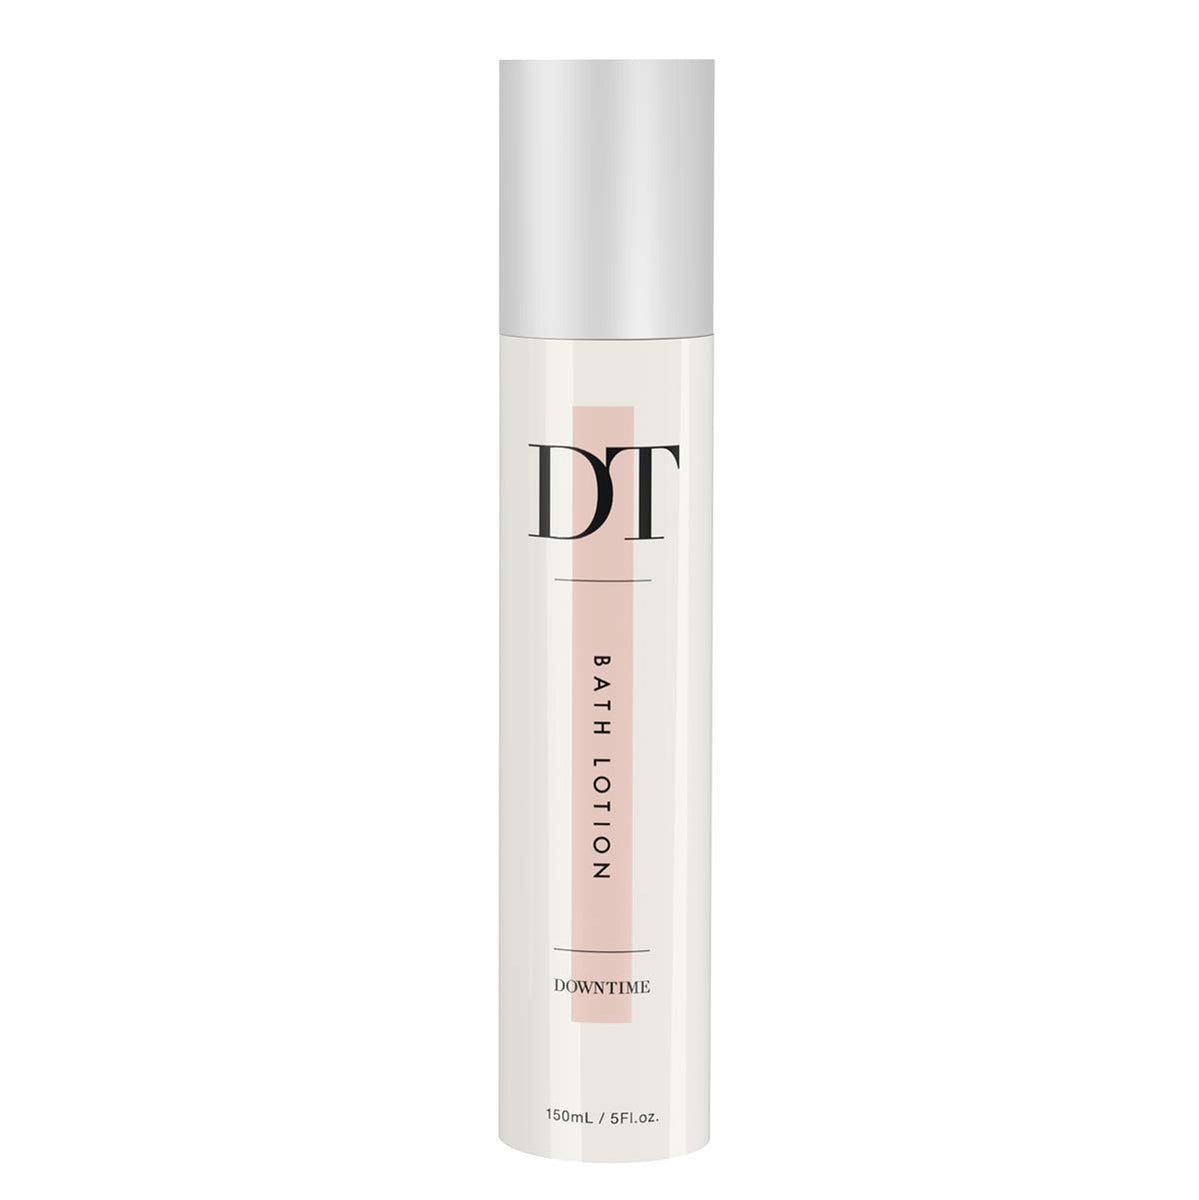 DT BATH LOTION (Downtime Bath Lotion) - Accelerates healing of edema and  swelling after liposuction/plastic surgery [thighs, upper arms, face,